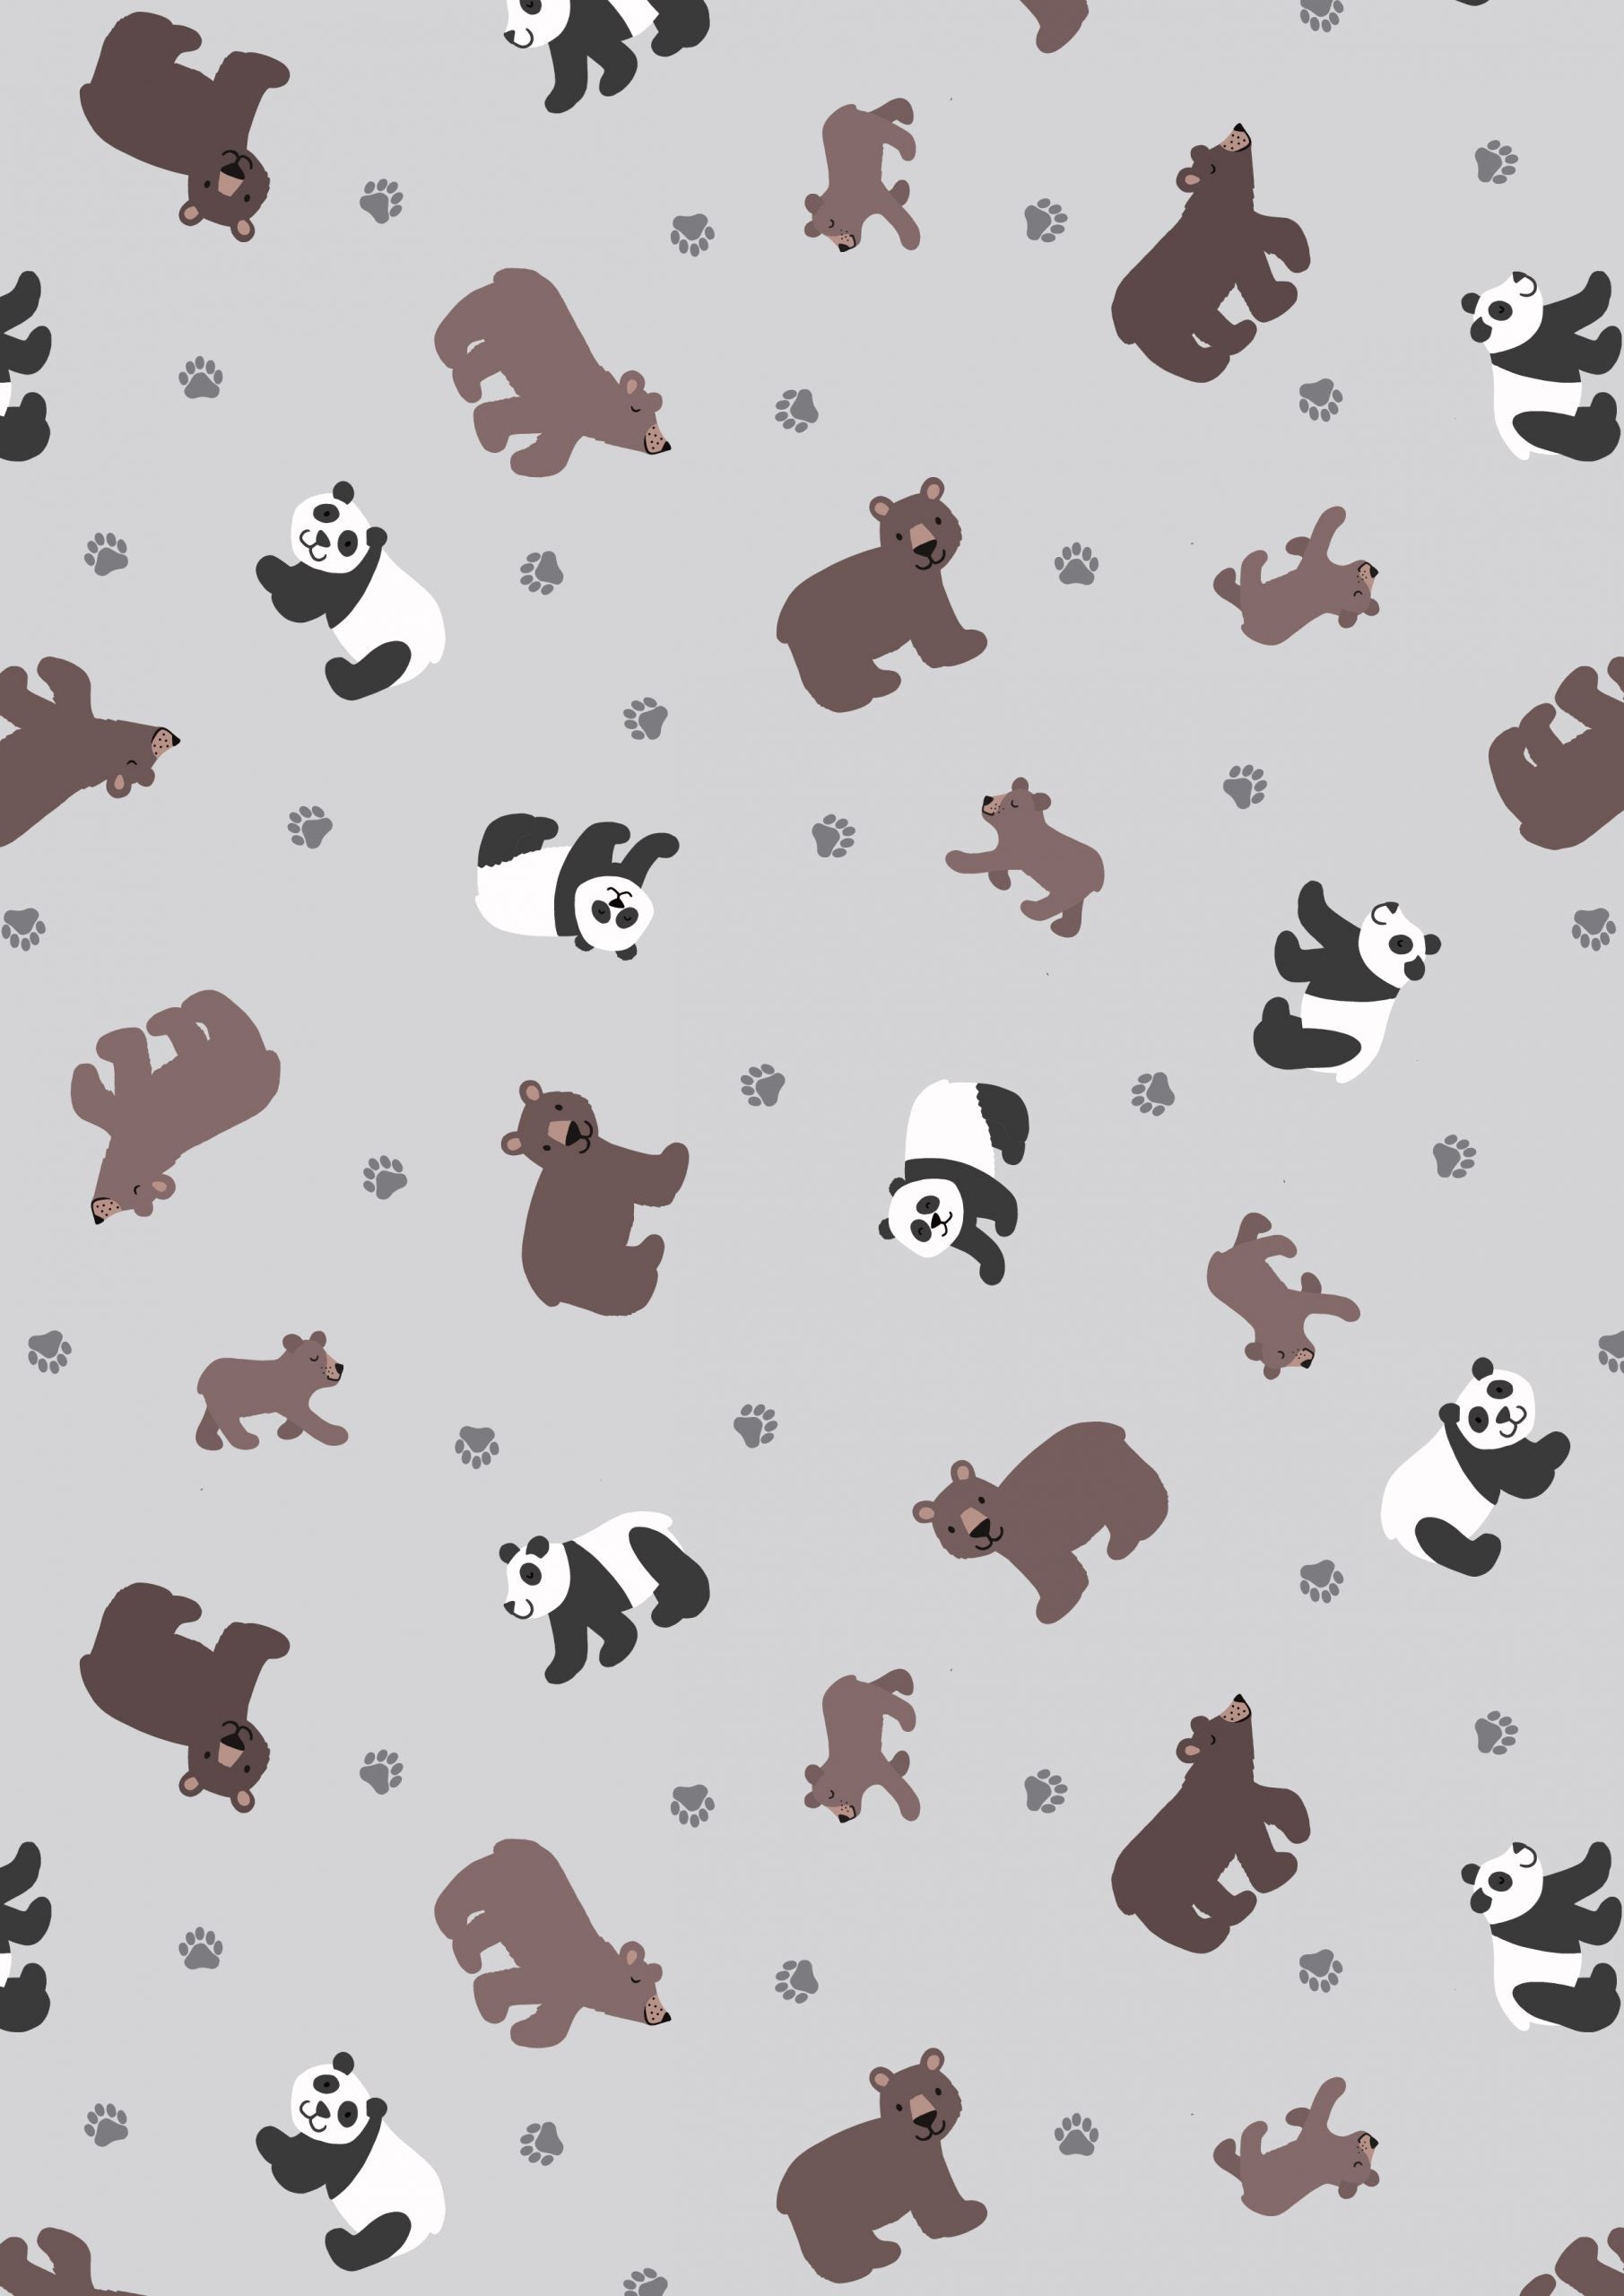 Small Things Wild Animals Quilt Fabric - Pandas and Bears in Light Grey/Gray - SM54.1